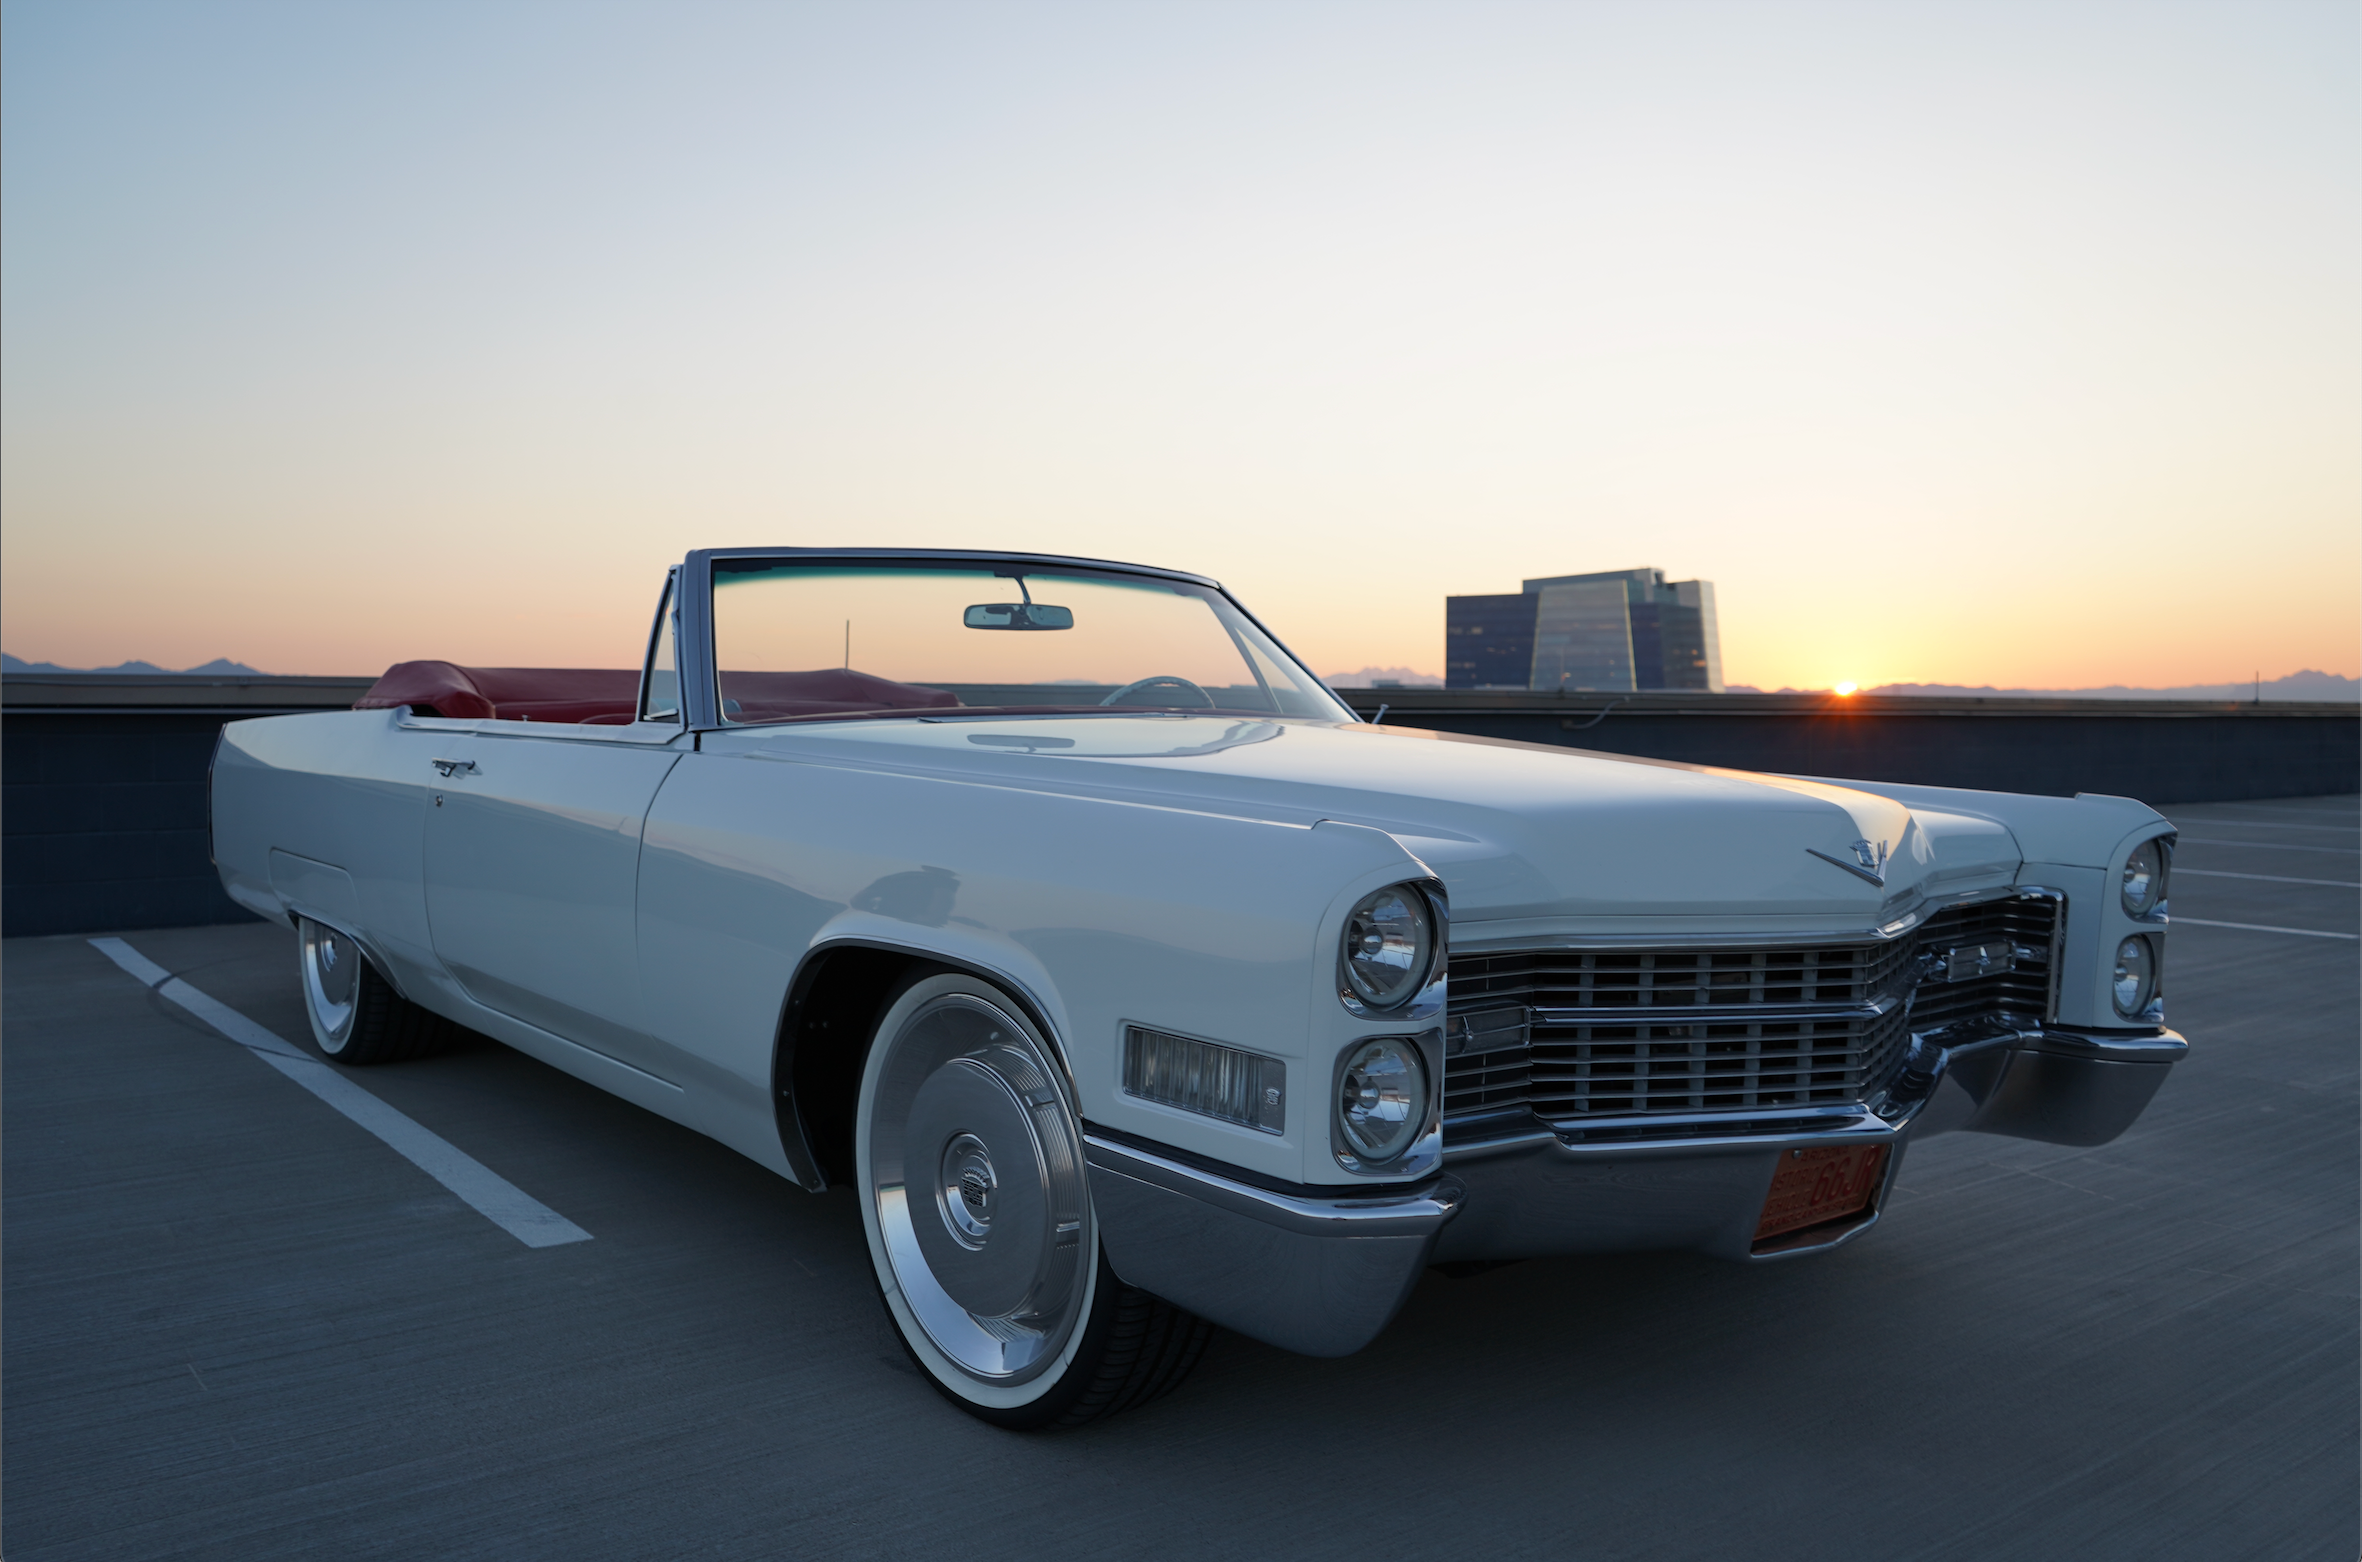 Legacy EV’s 1966 Cadillac Coupe “dEVille” Electro-Mod Will Cross the Block During the Barrett-Jackson Scottsdale Auction